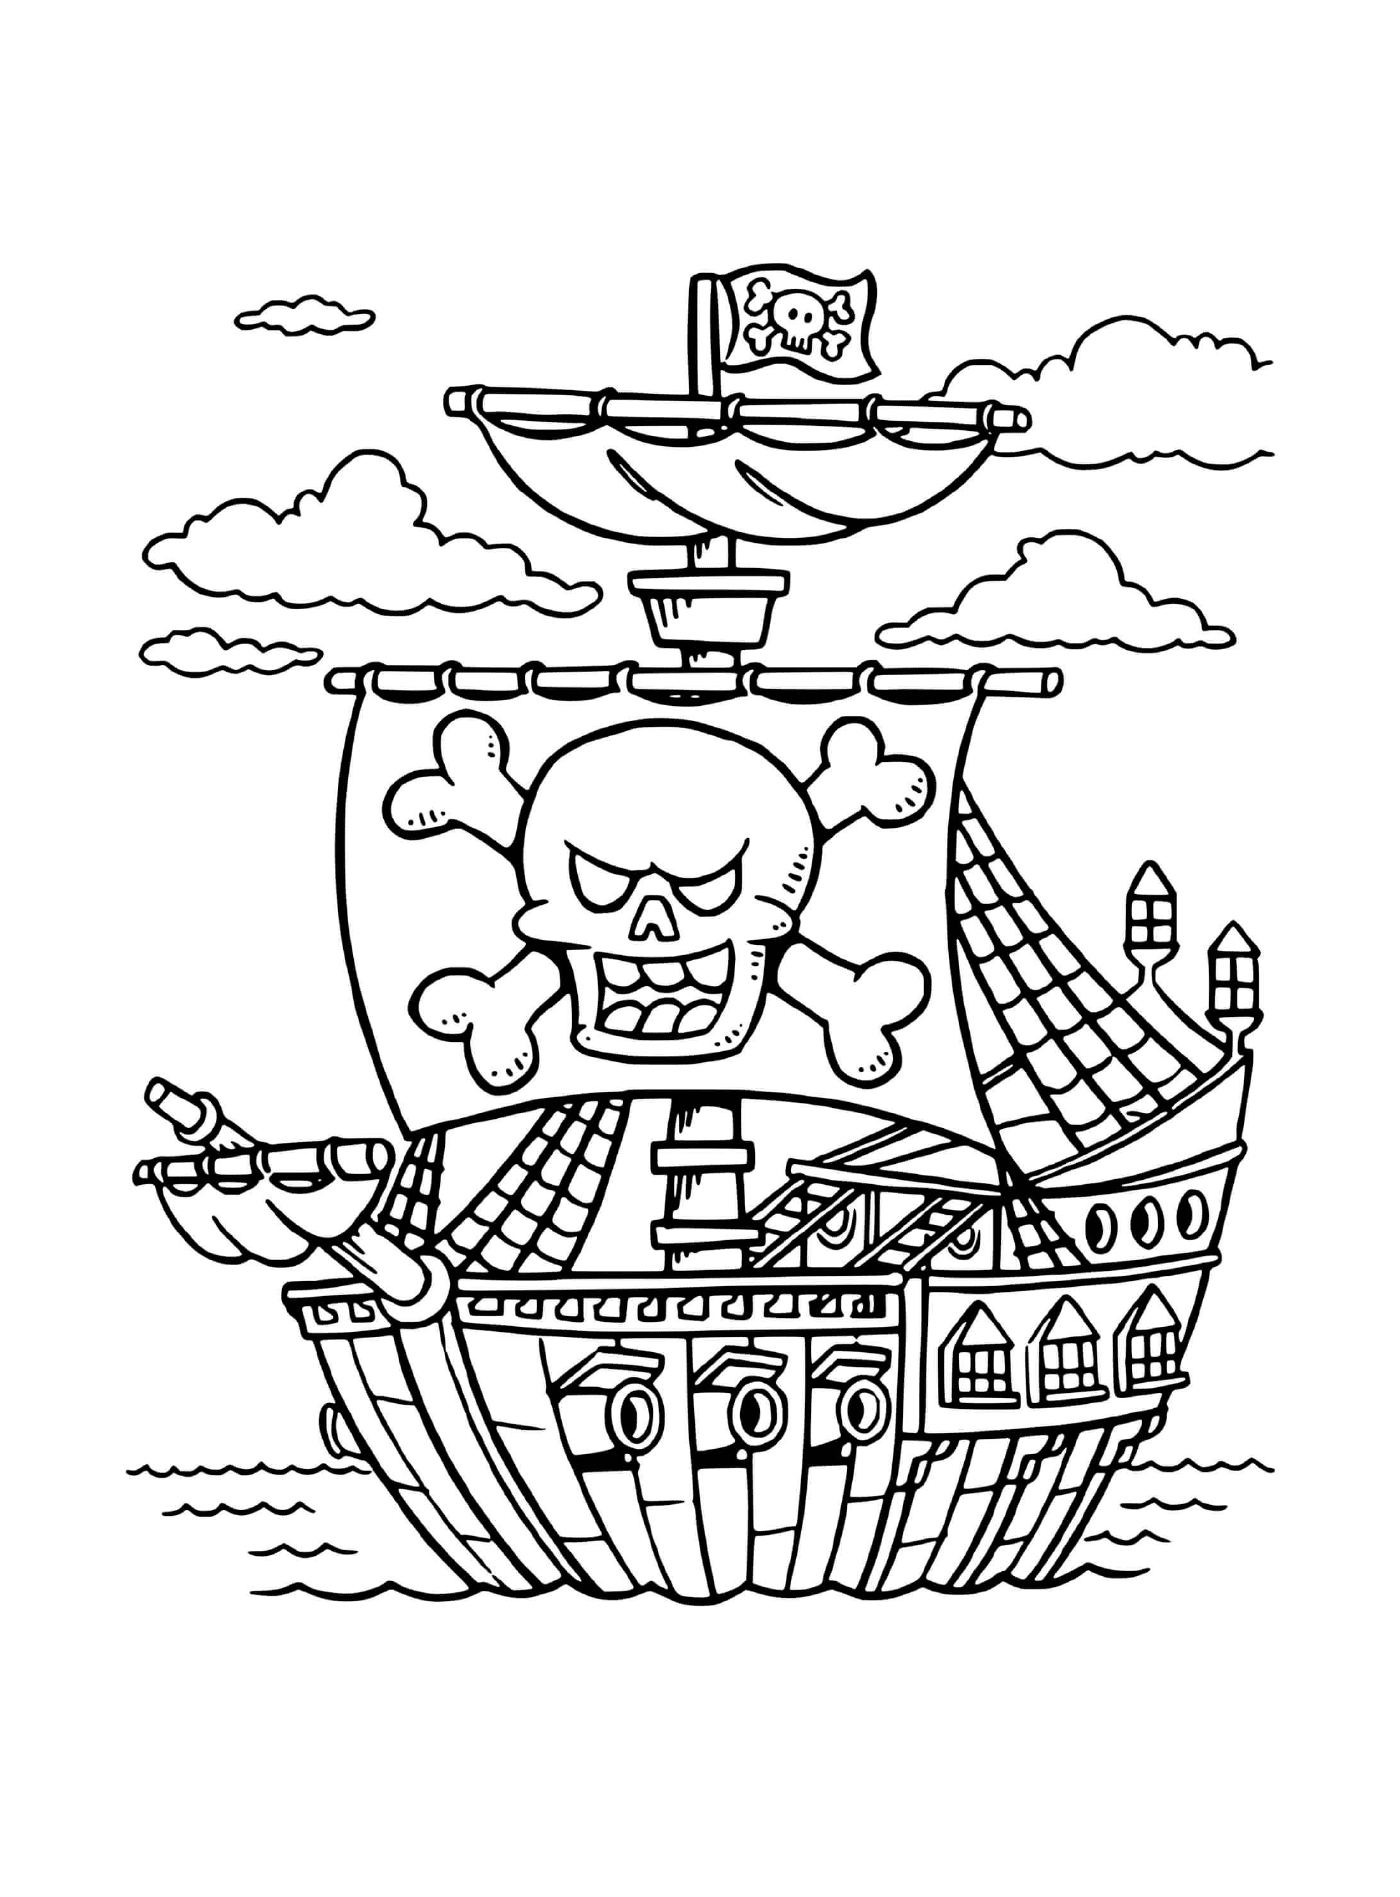  Pirate boat with scary flag 